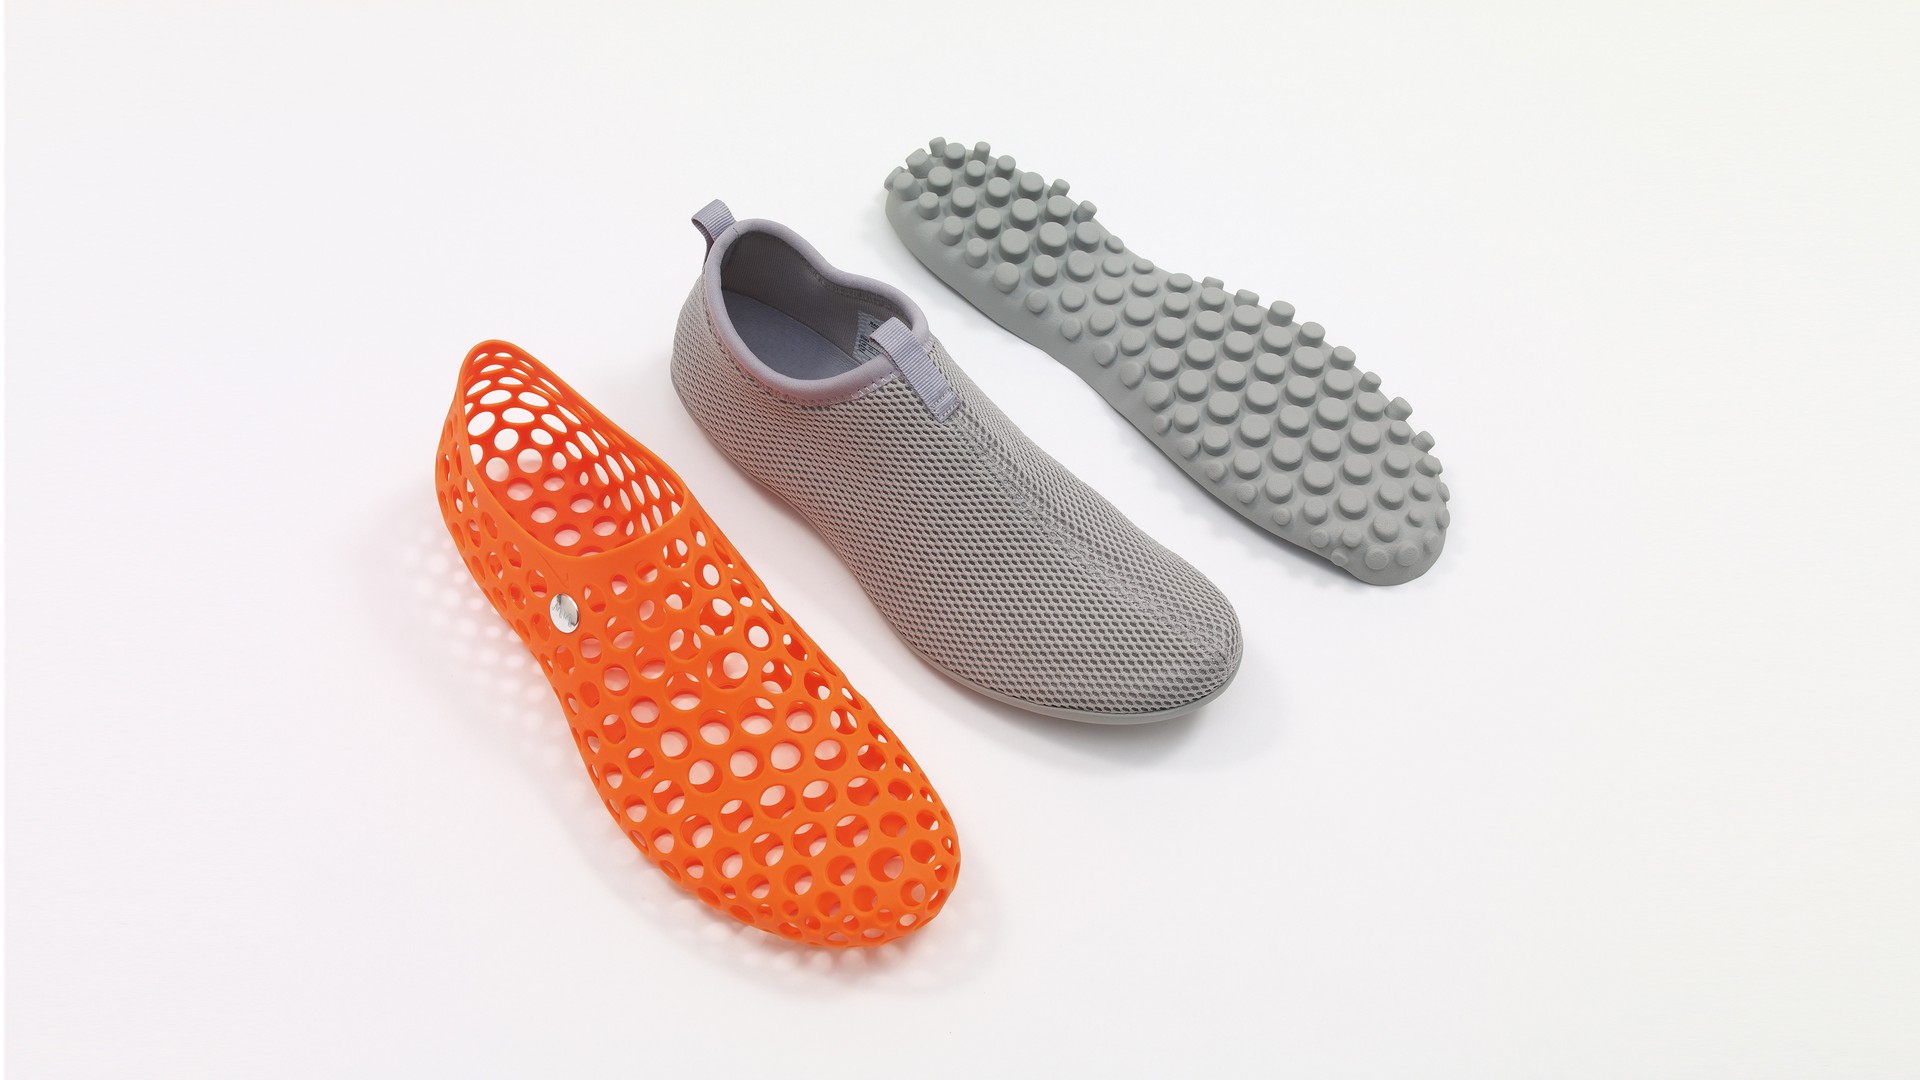 New Footwear Design by Marc Newson: The Yard Boot 365 - Core77